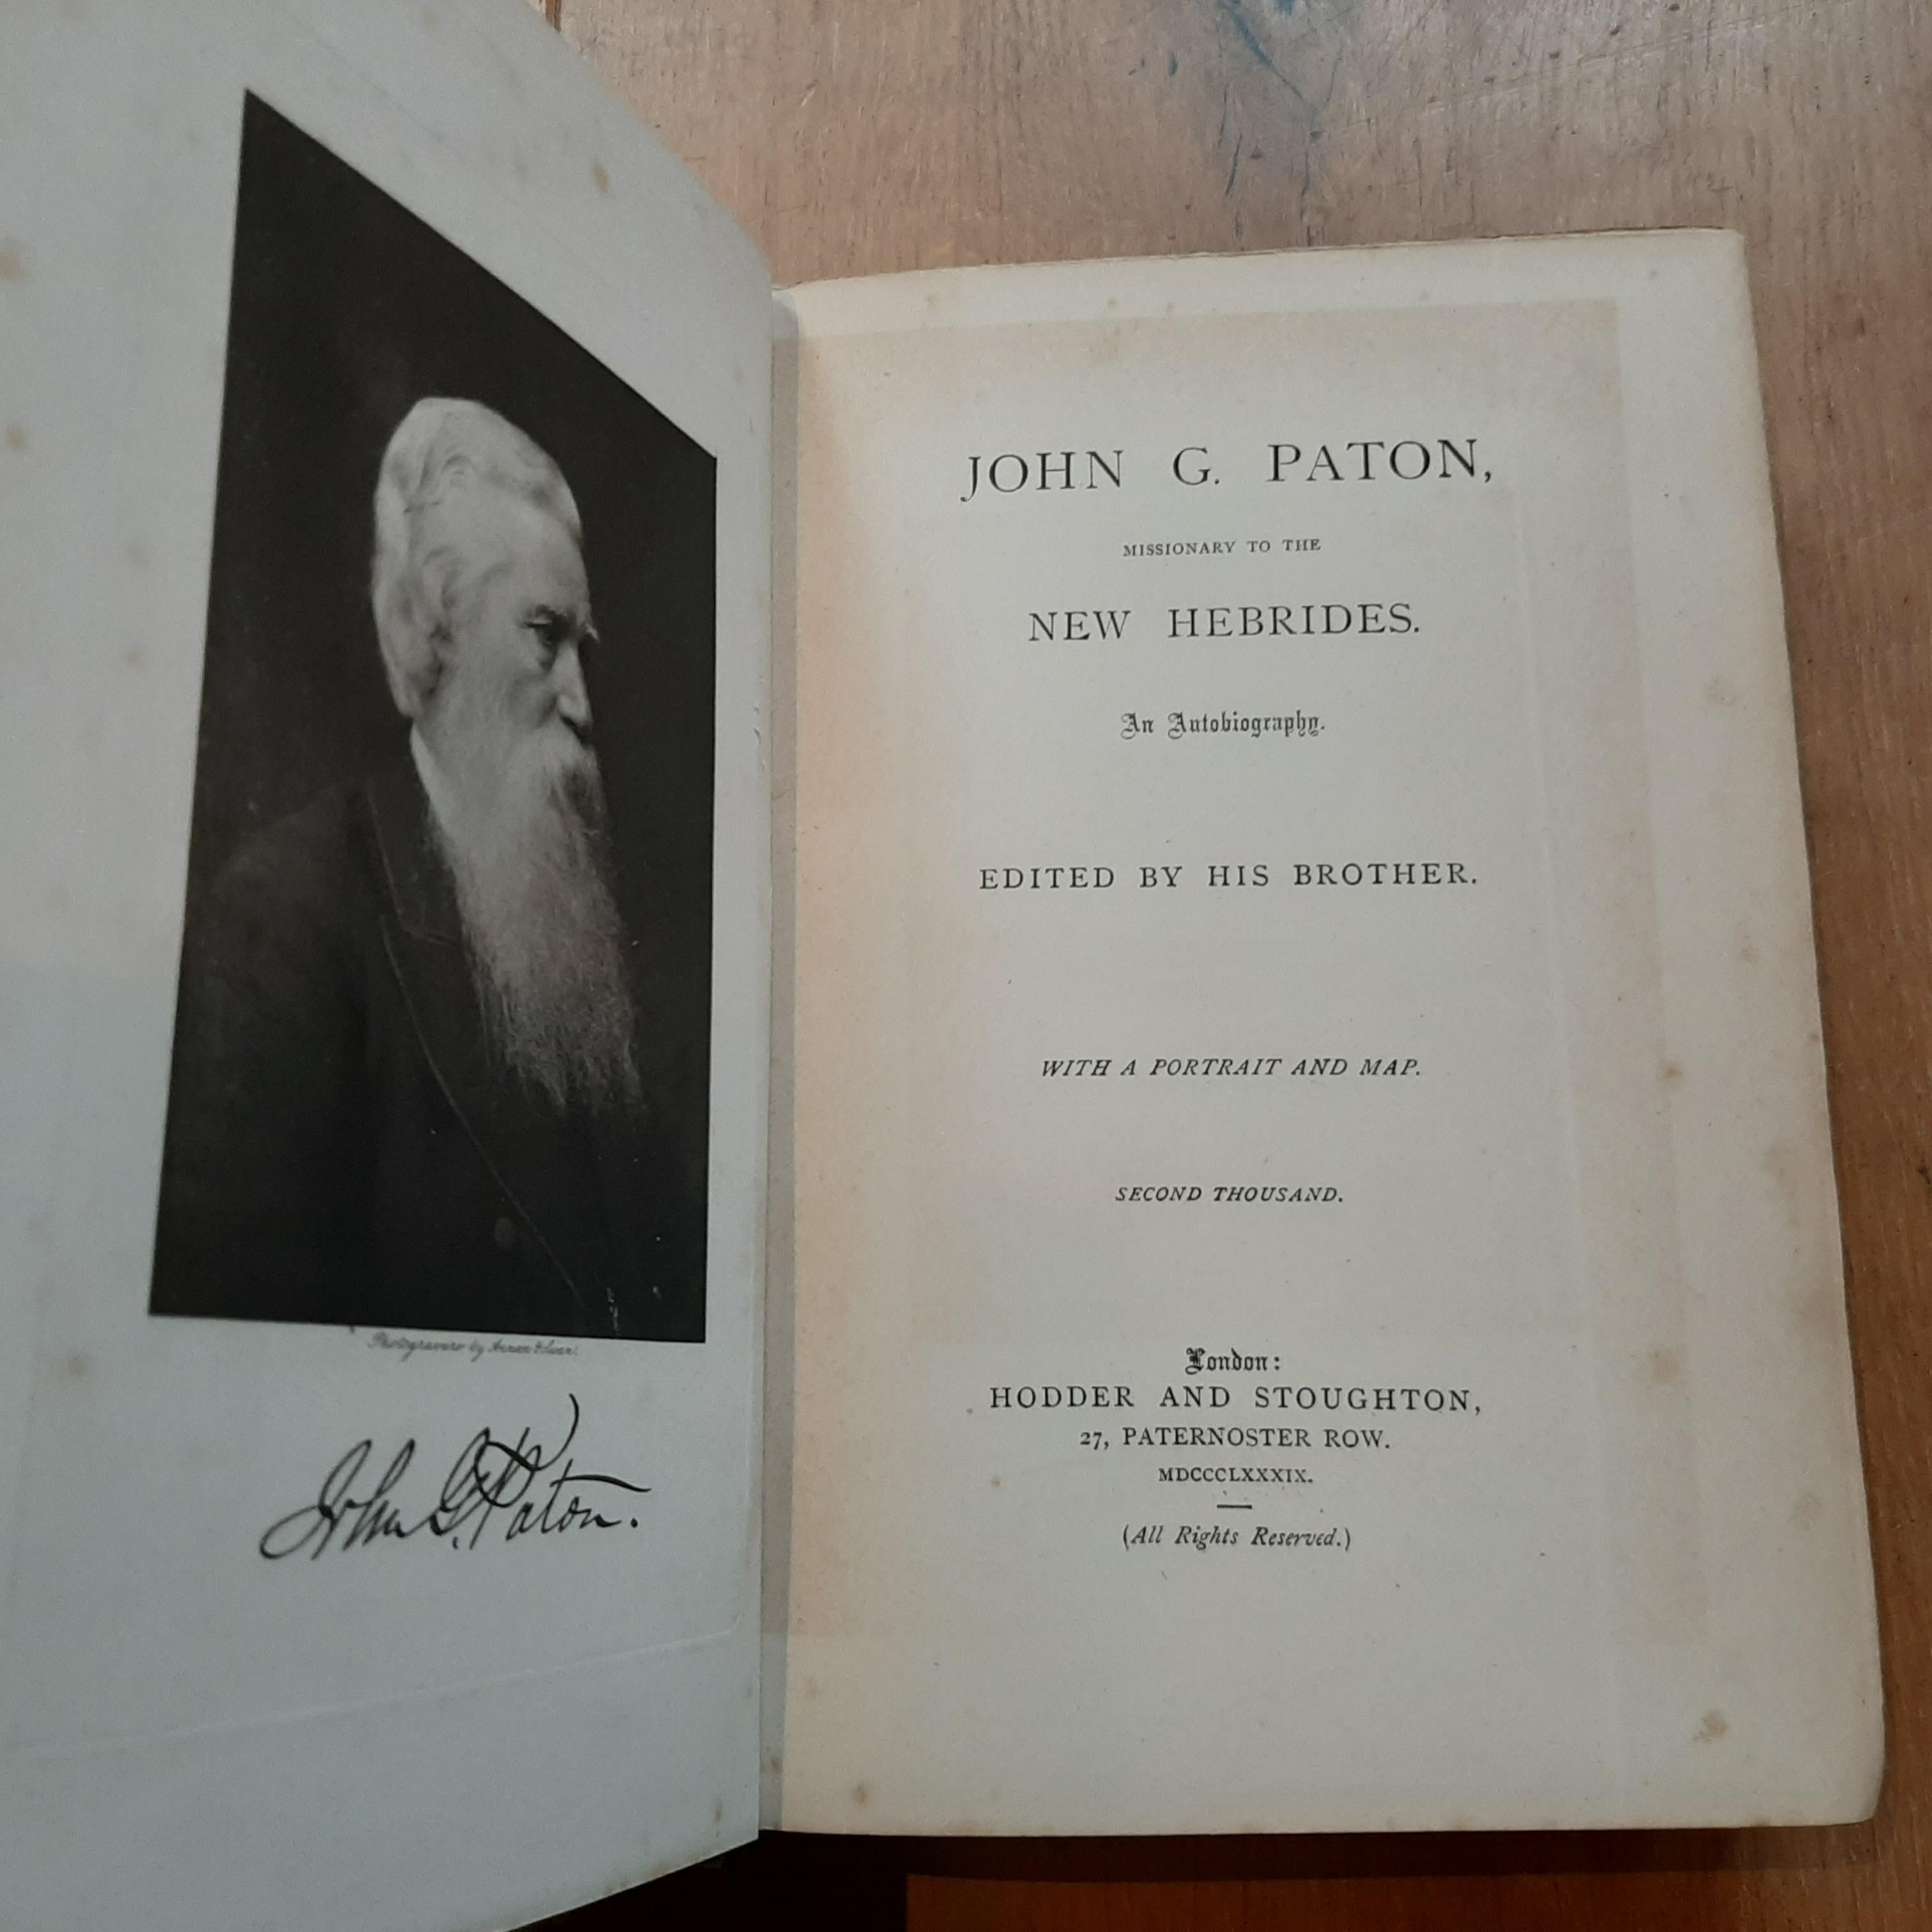 'Missionary to the New Hebrides, an Autobiography' by John G. Paton. Edited by his brother. ibid., 1889, frontisp. portrait, map, orig. cl.